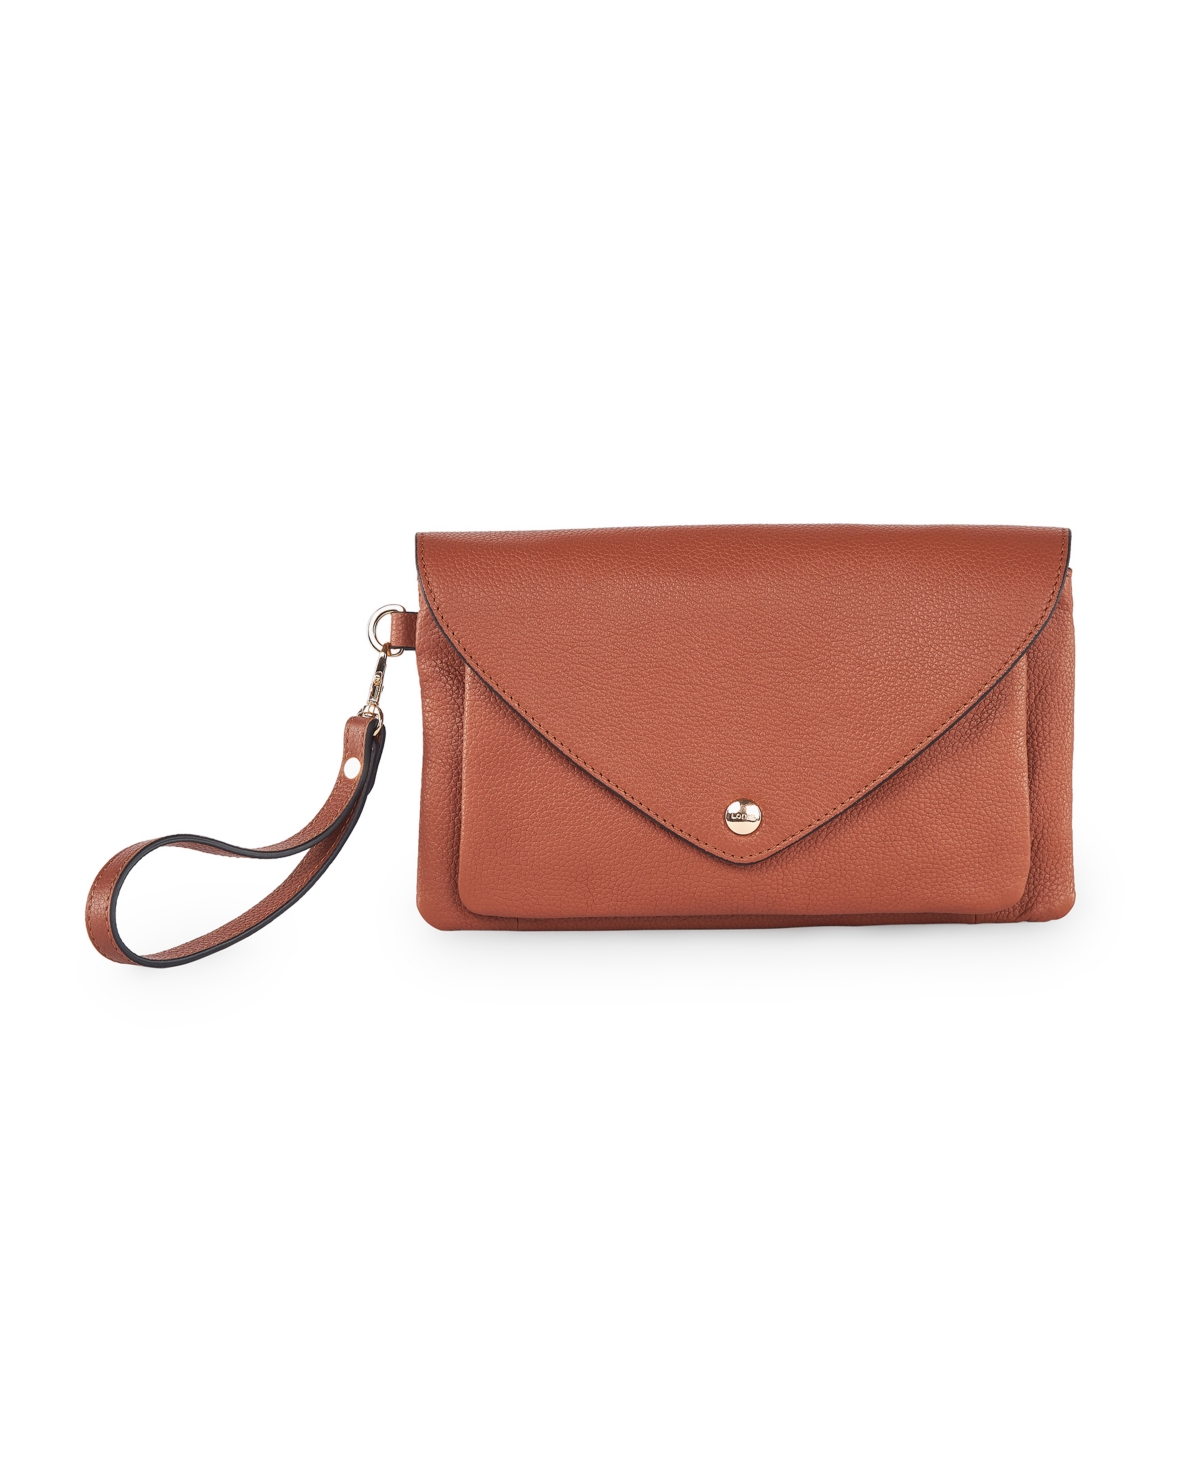 Paige Wos Small Bag - Chestnut